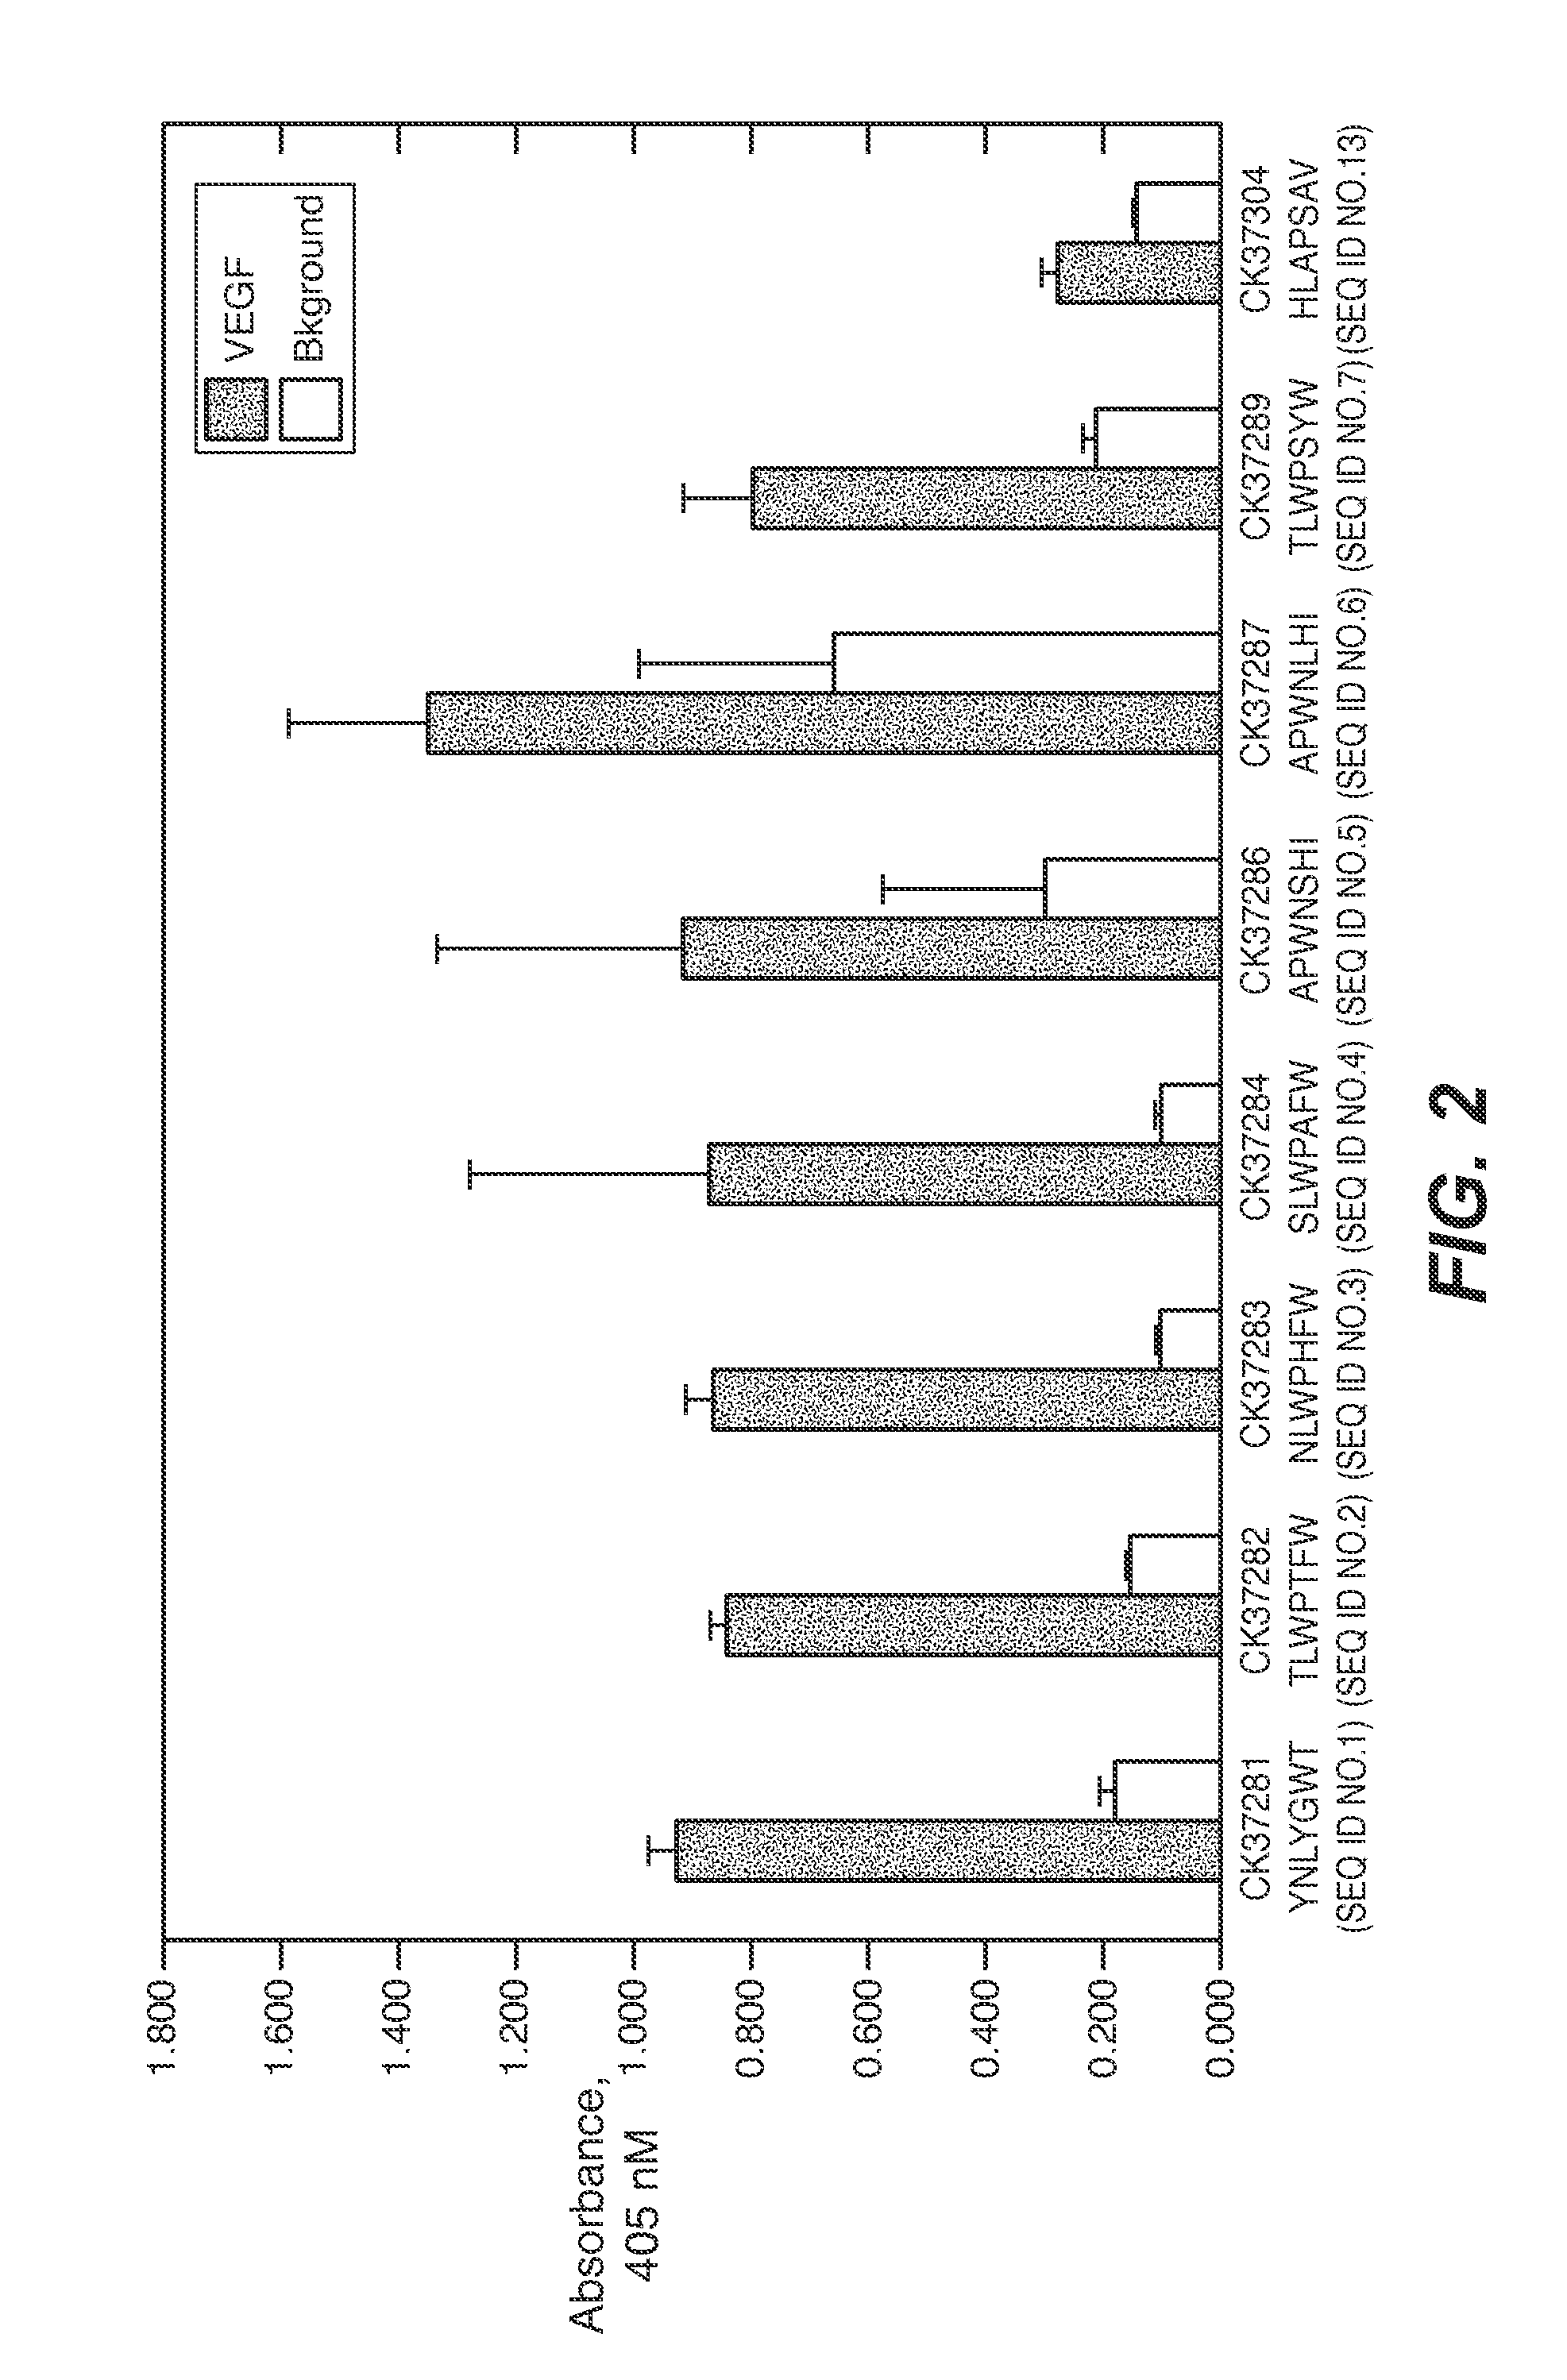 Peptide personal care compositions and methods for their use